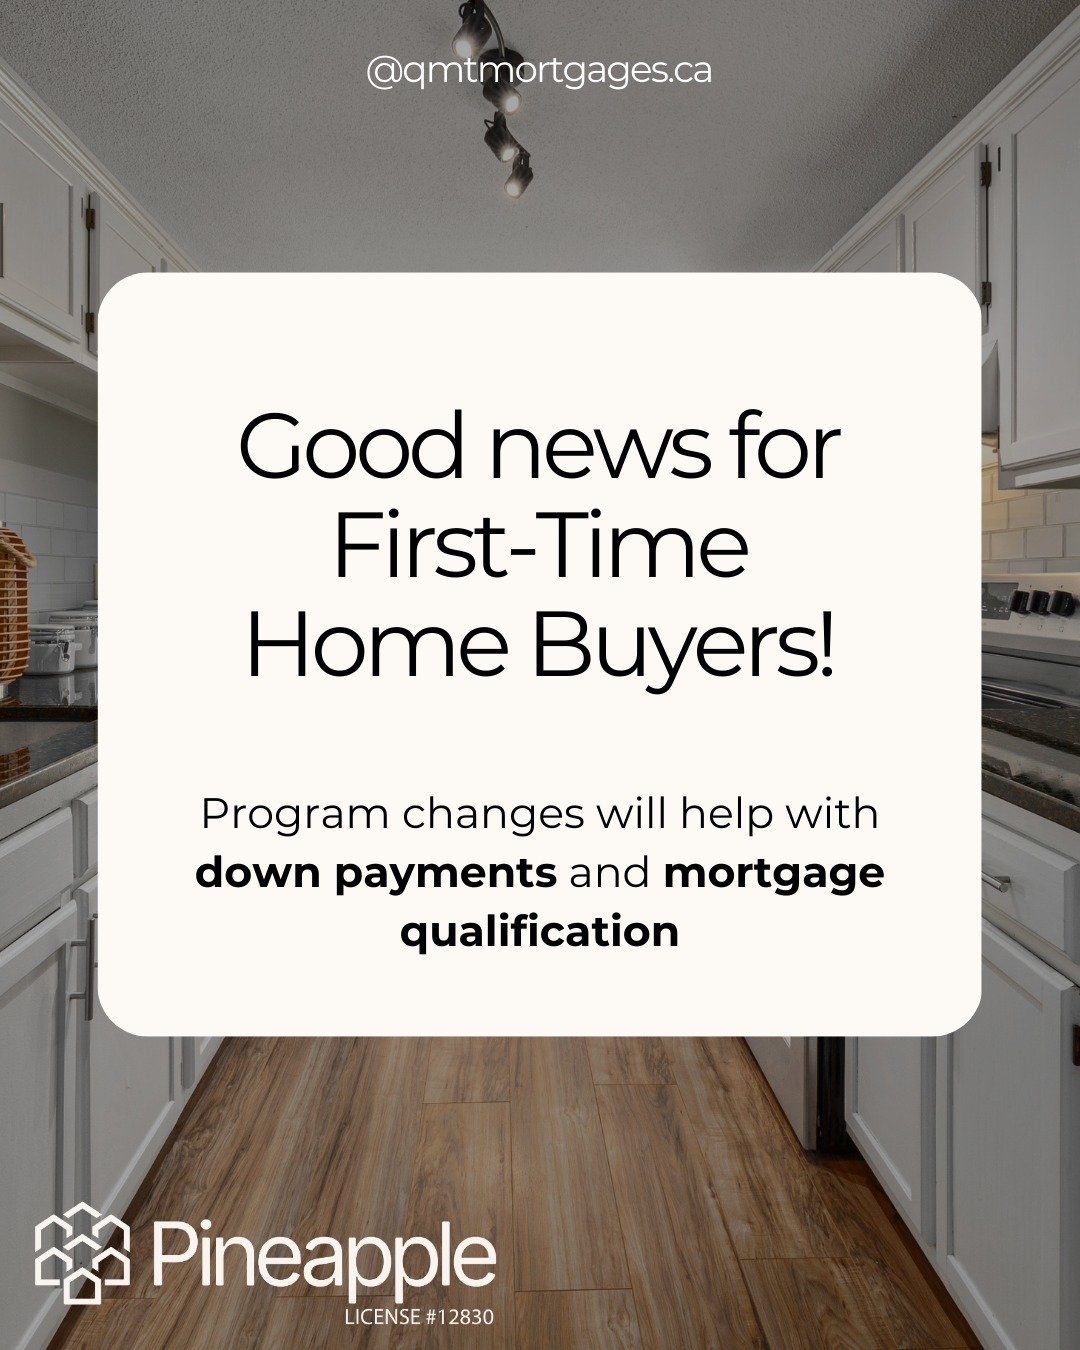 Updates from the 2024 Federal budget geared towards helping first-time home buyers (FTHBs):

1. You can now use up to $60K of your RRSP towards your down payment (up from $35K)!
2. Plus, you can leverage a 30-year amortization to qualify for larger i